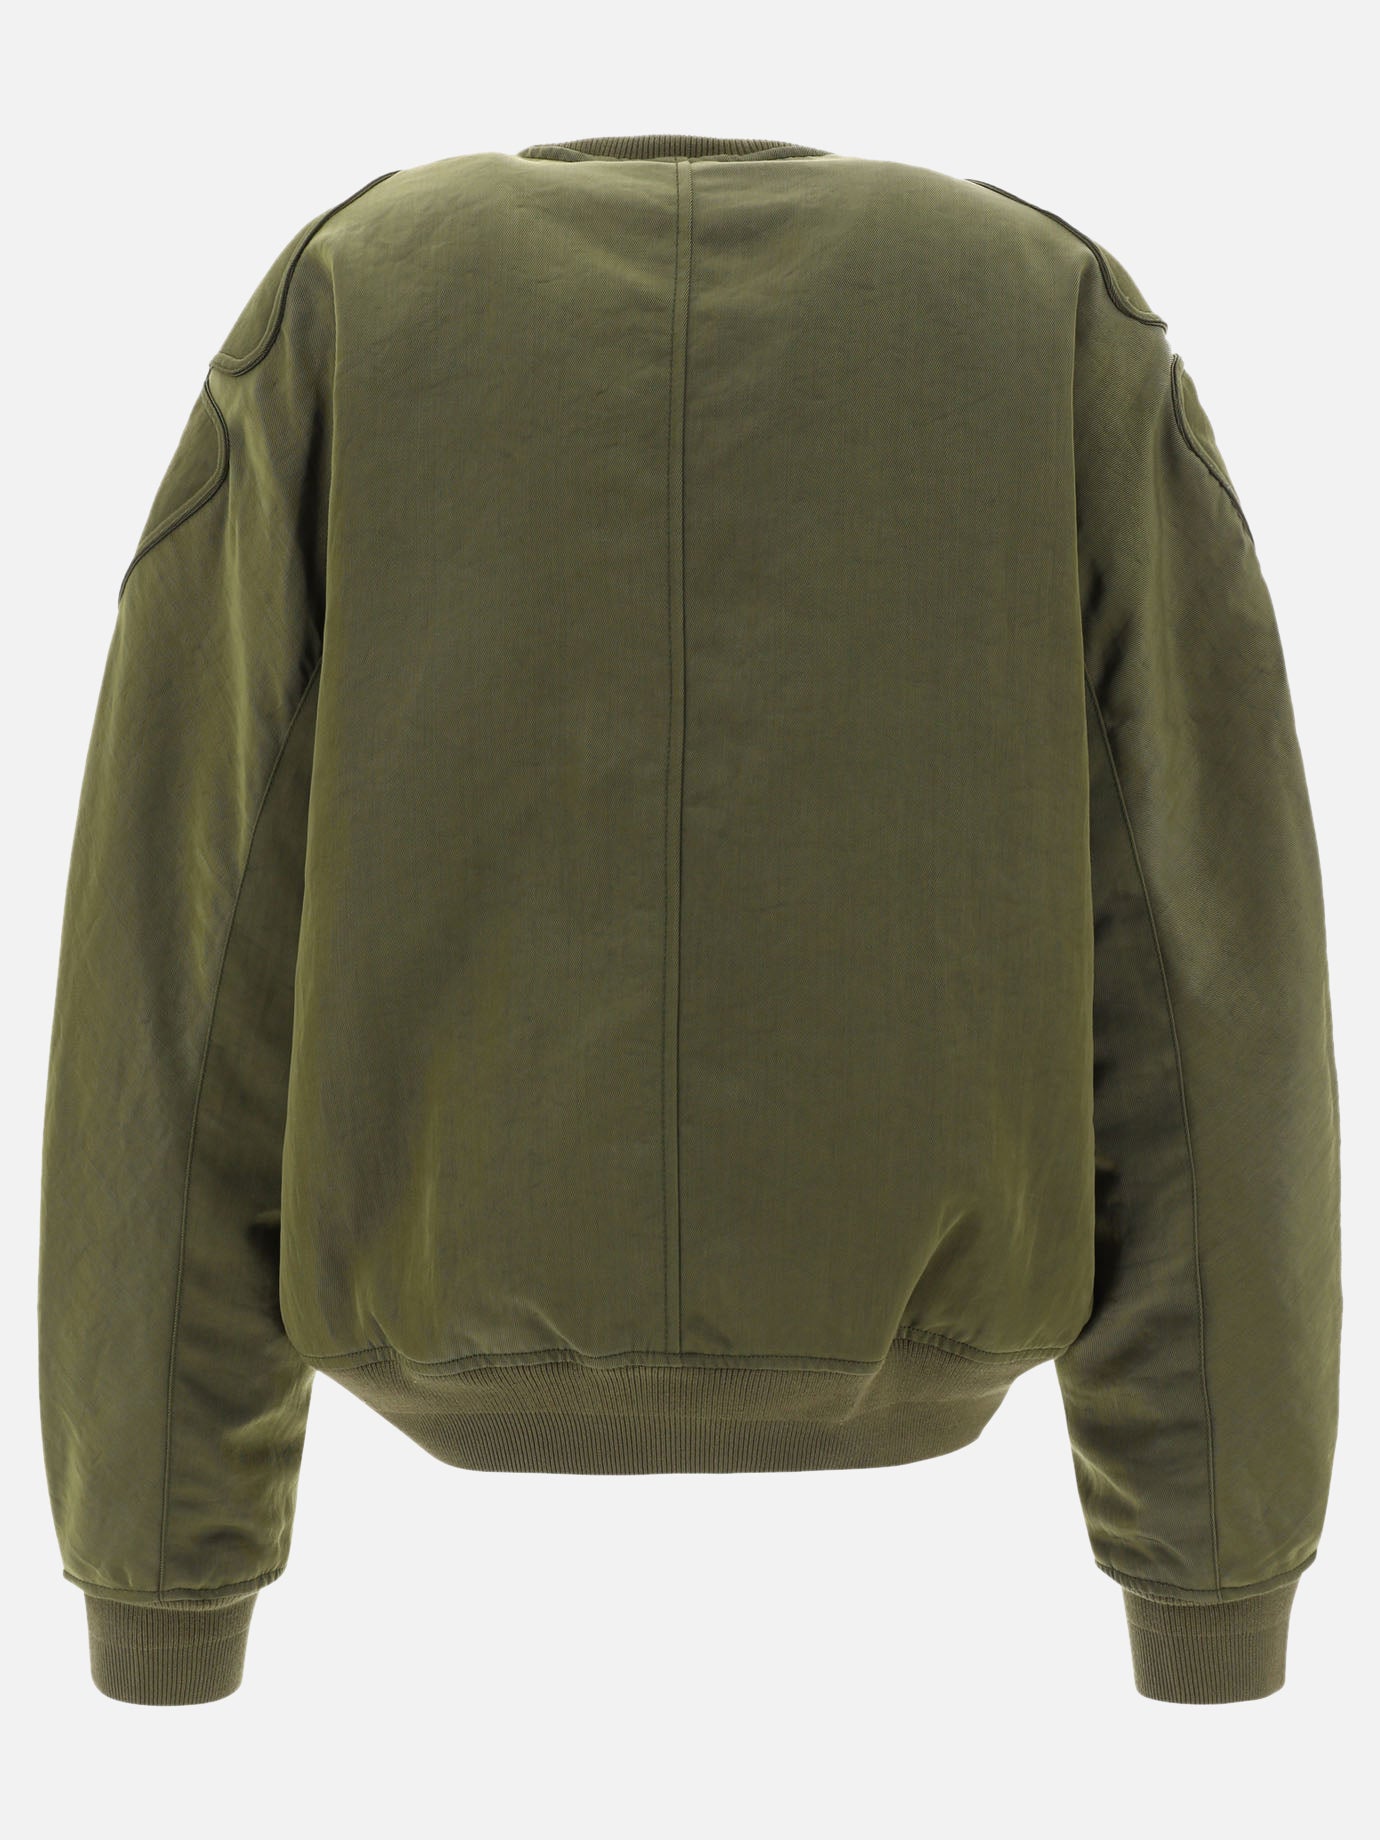 Bomber jacket with contrasting interior